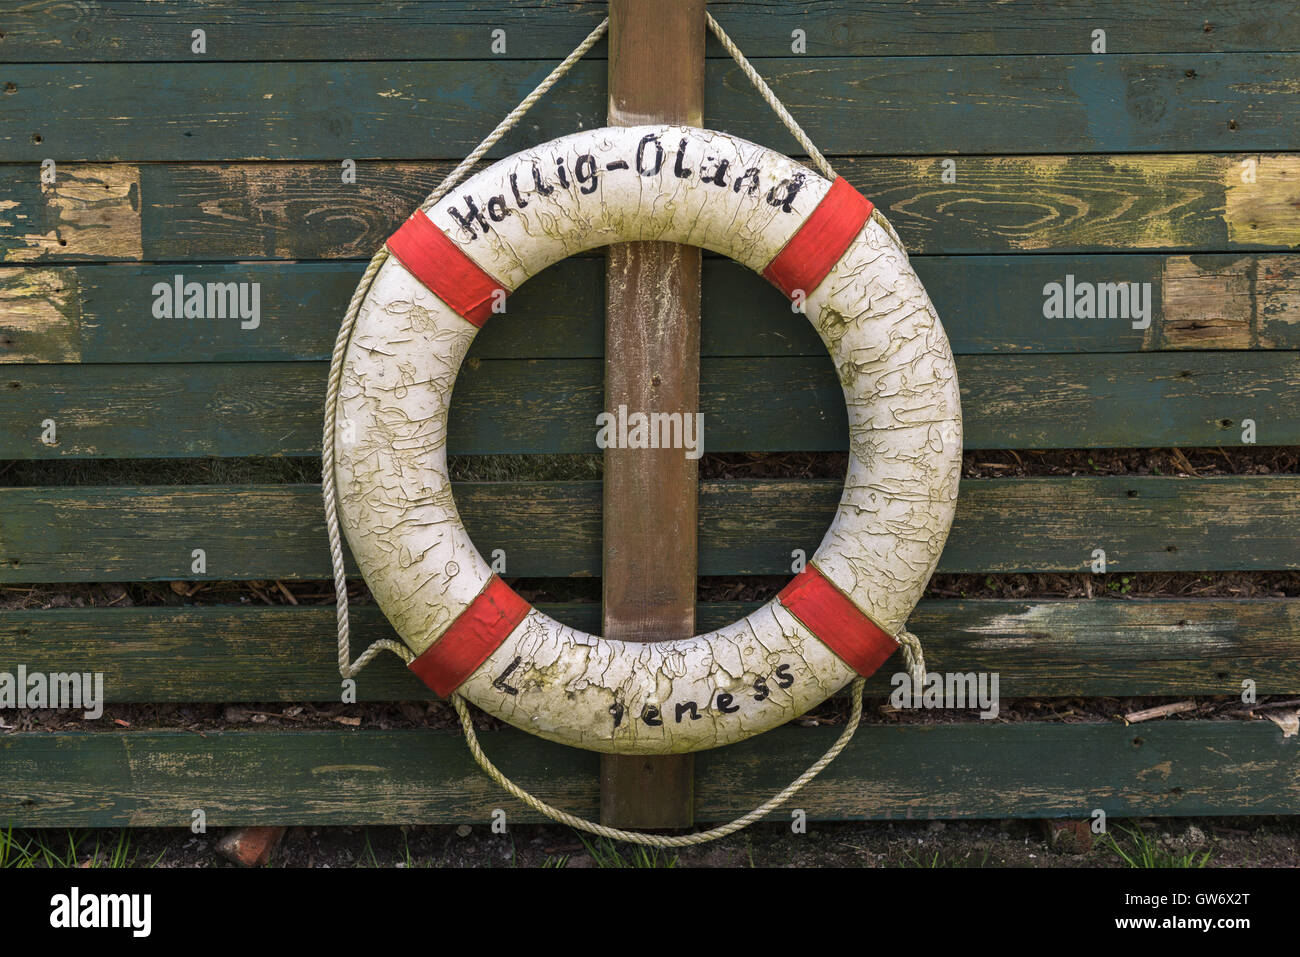 An old rescue belt hanging at a wooden hut, islet of Langeness in the mud flats, North Sea, Schleswig-Holstein, Germany Stock Photo